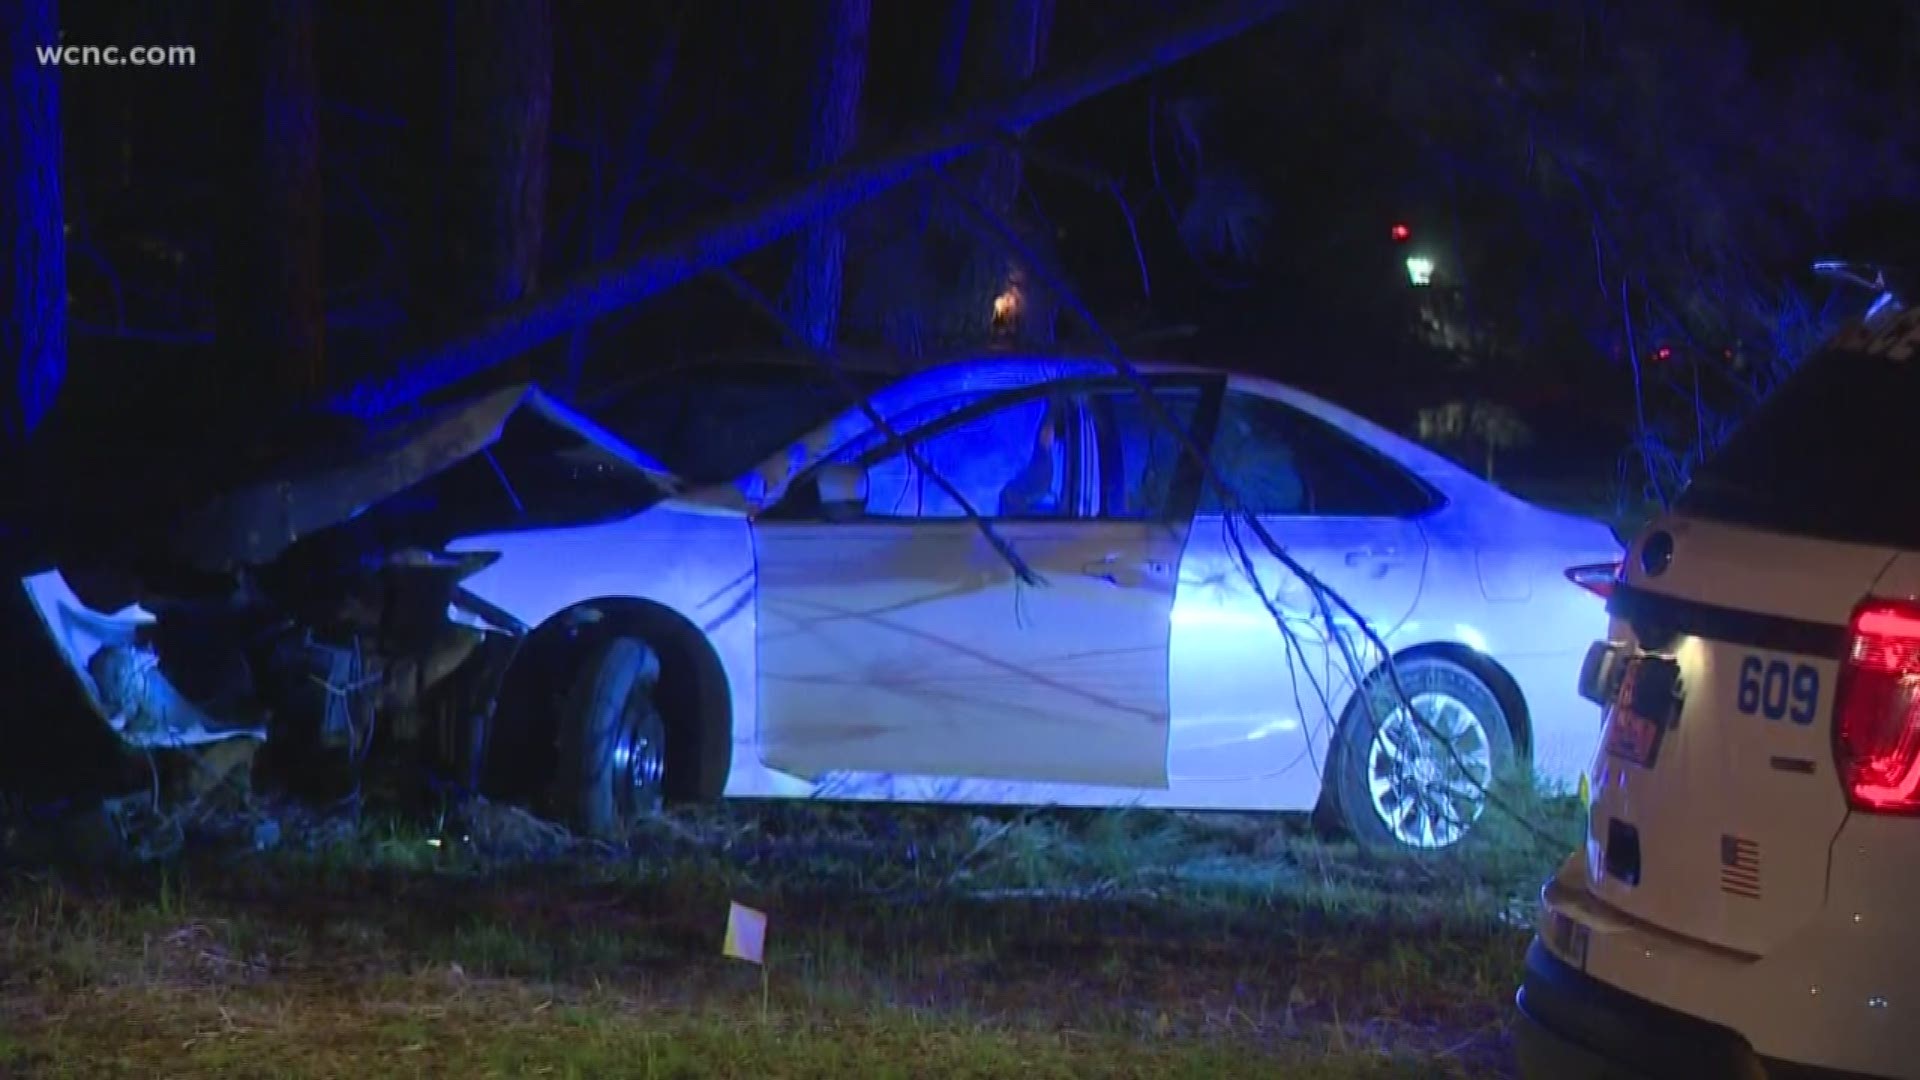 A suspect was taken to the hospital after a police chase ended in a crash in south Charlotte early Tuesday morning.